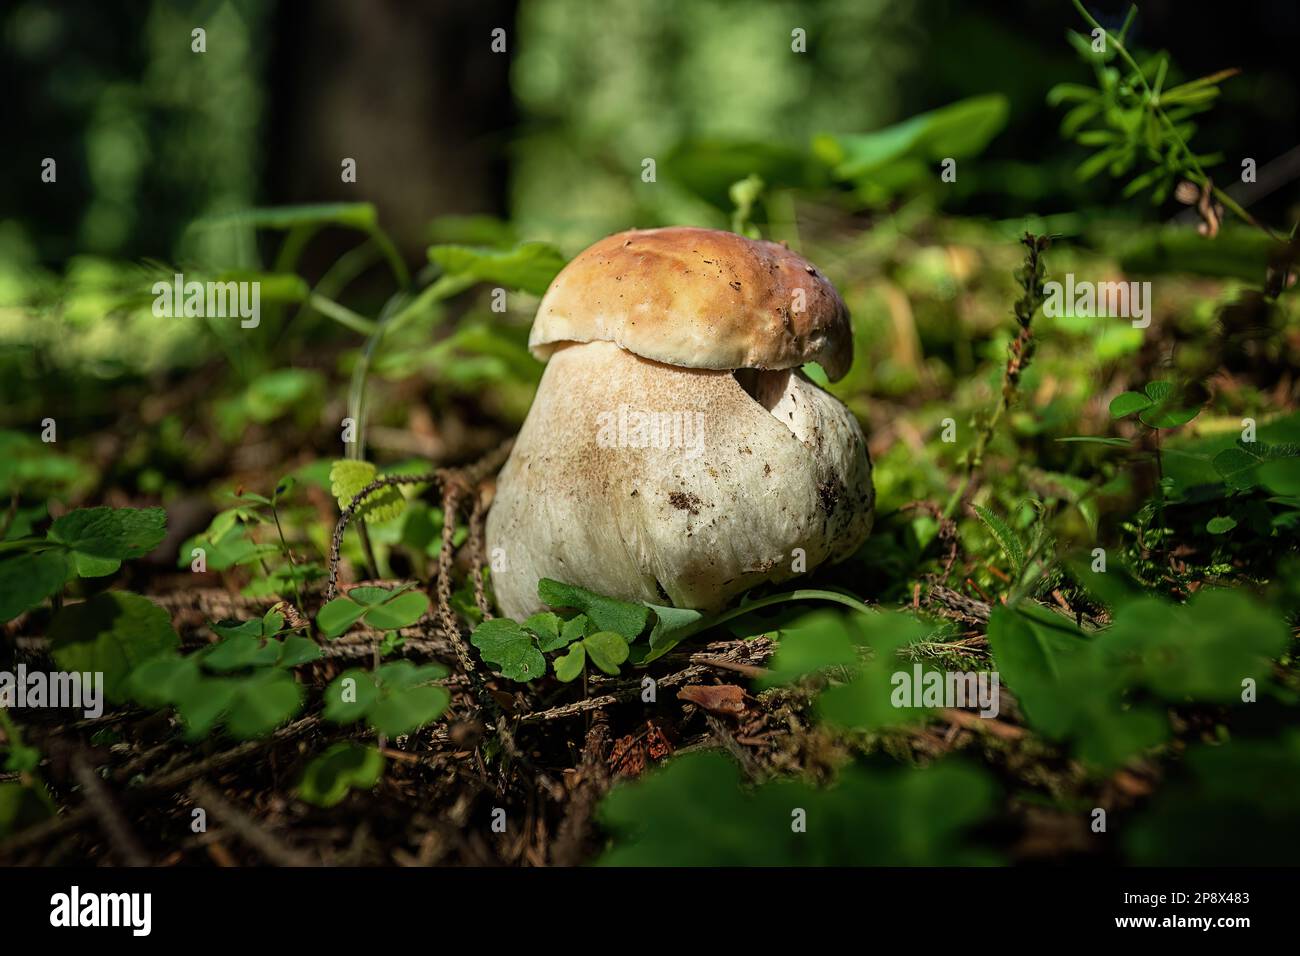 Edible porcini mushroom, in natural environment, with blurred background Stock Photo